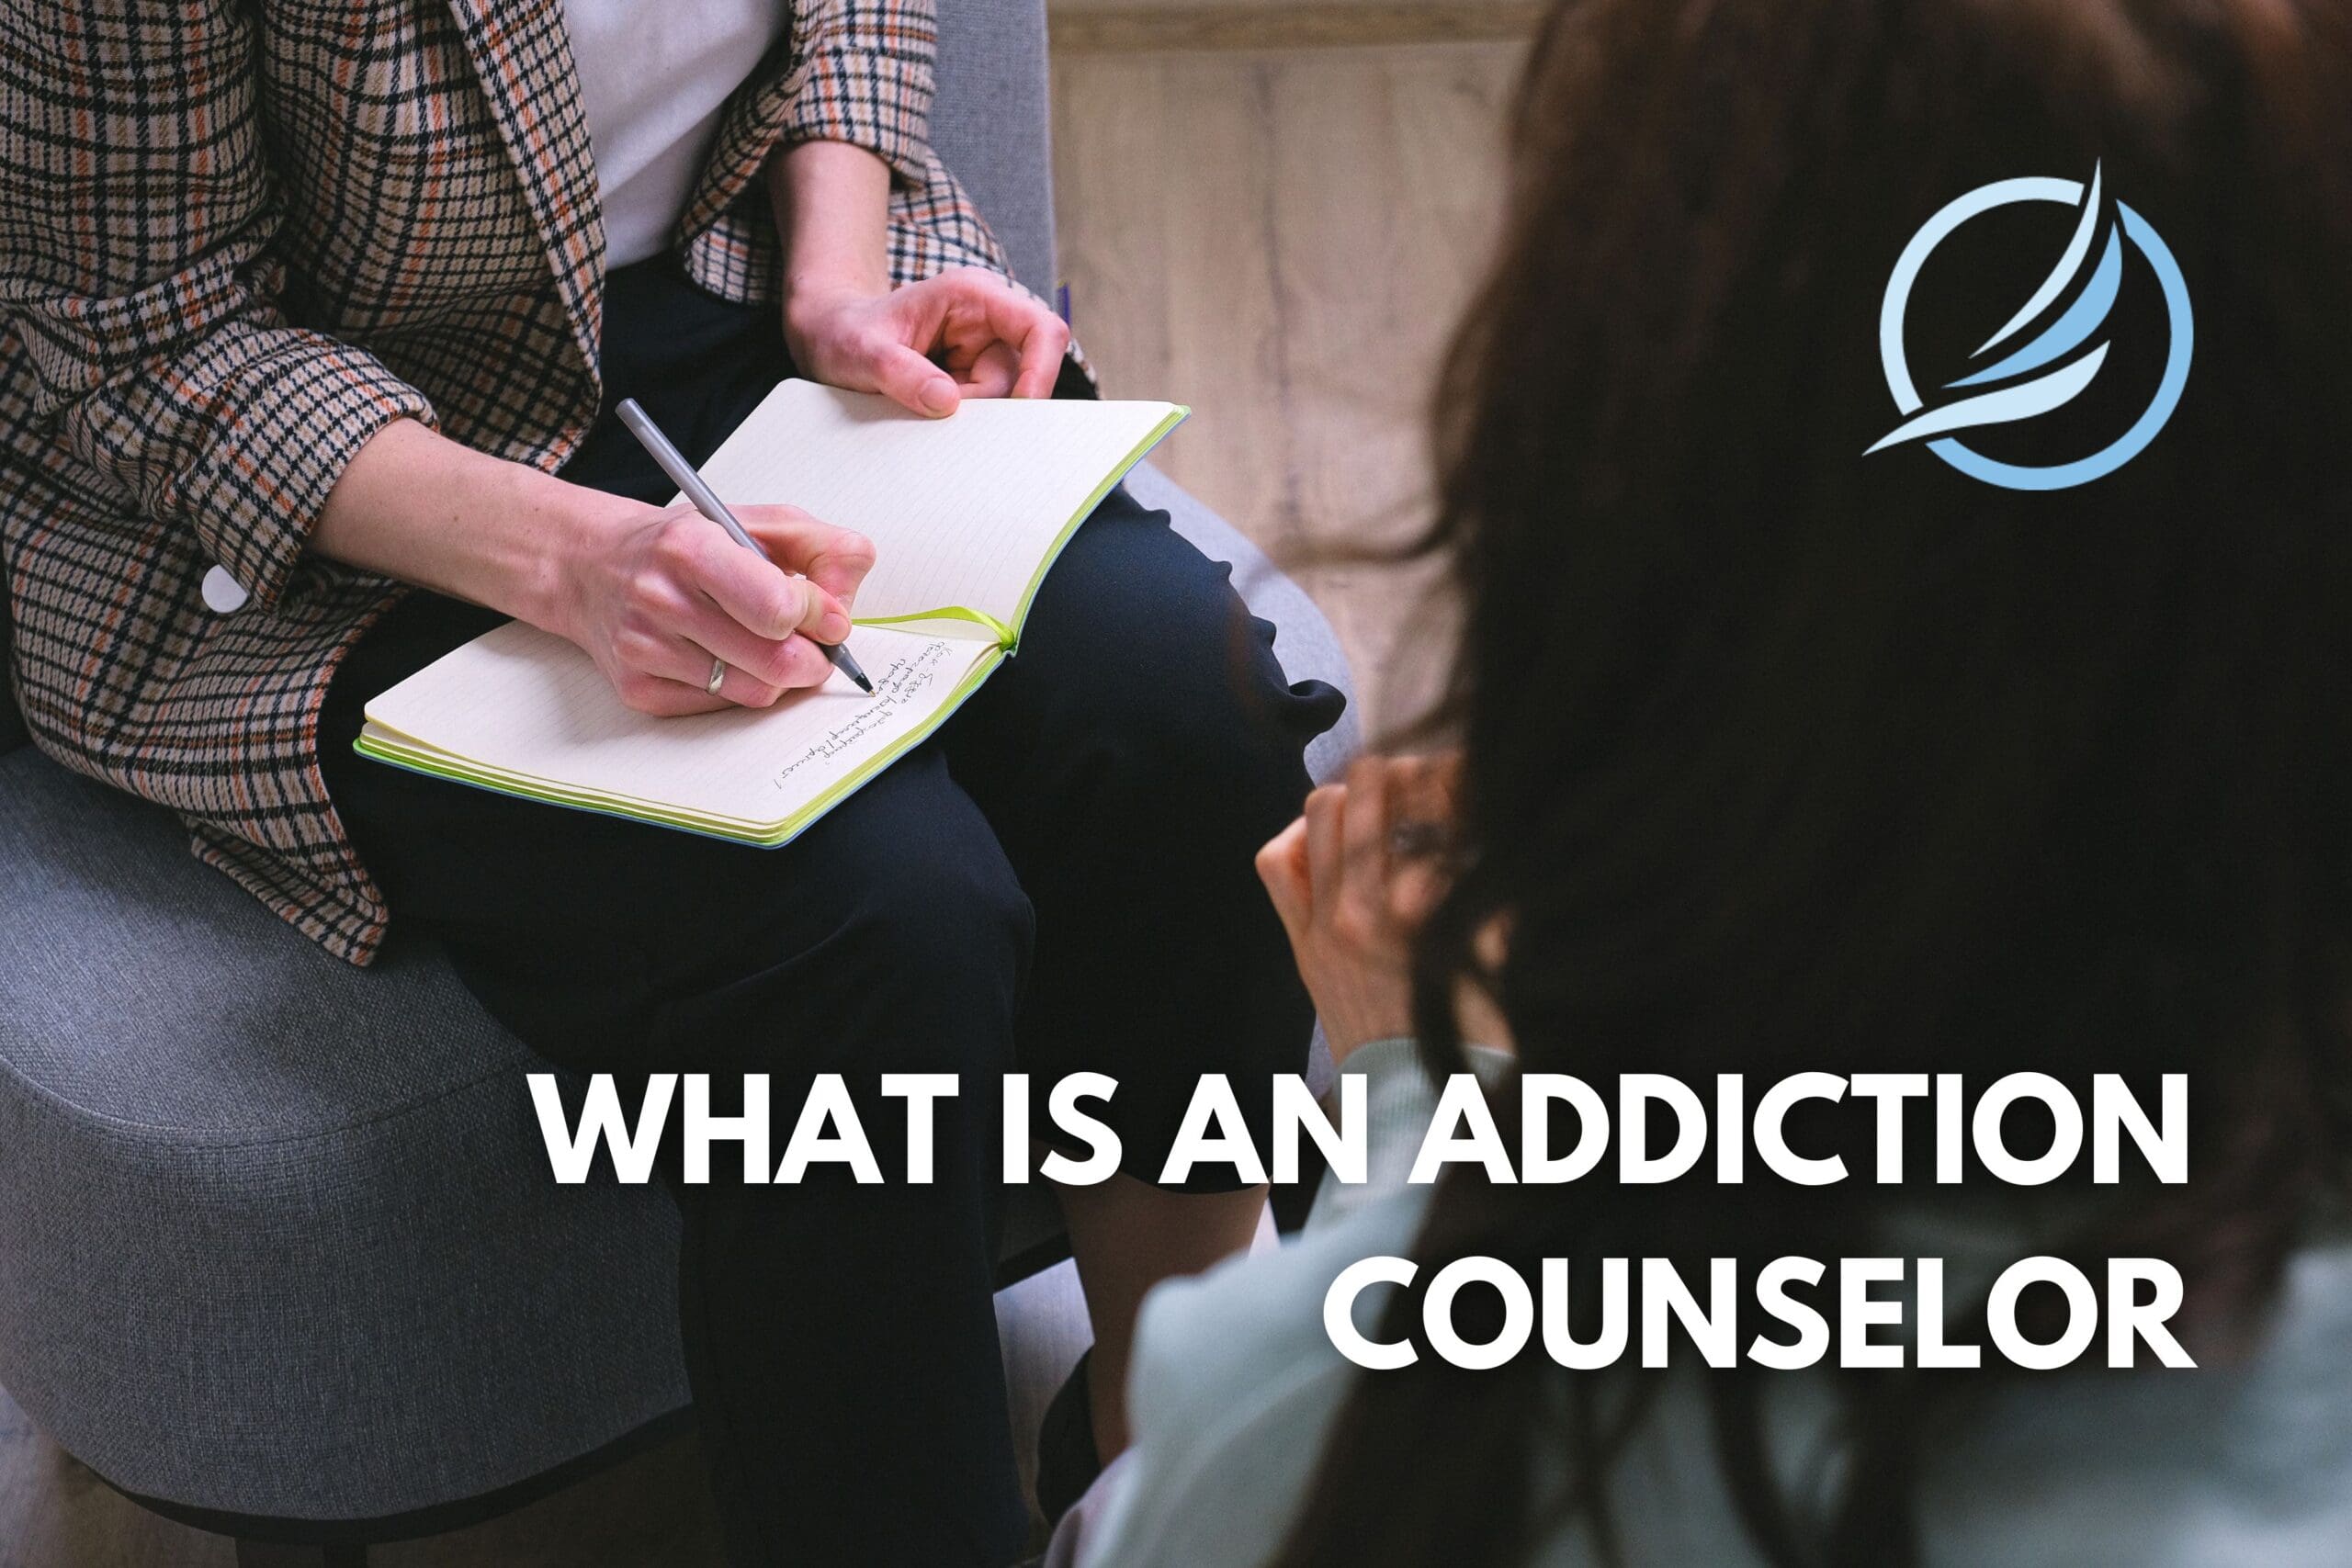 Addiction counselor in conversation, actively listening and providing guidance to a client.